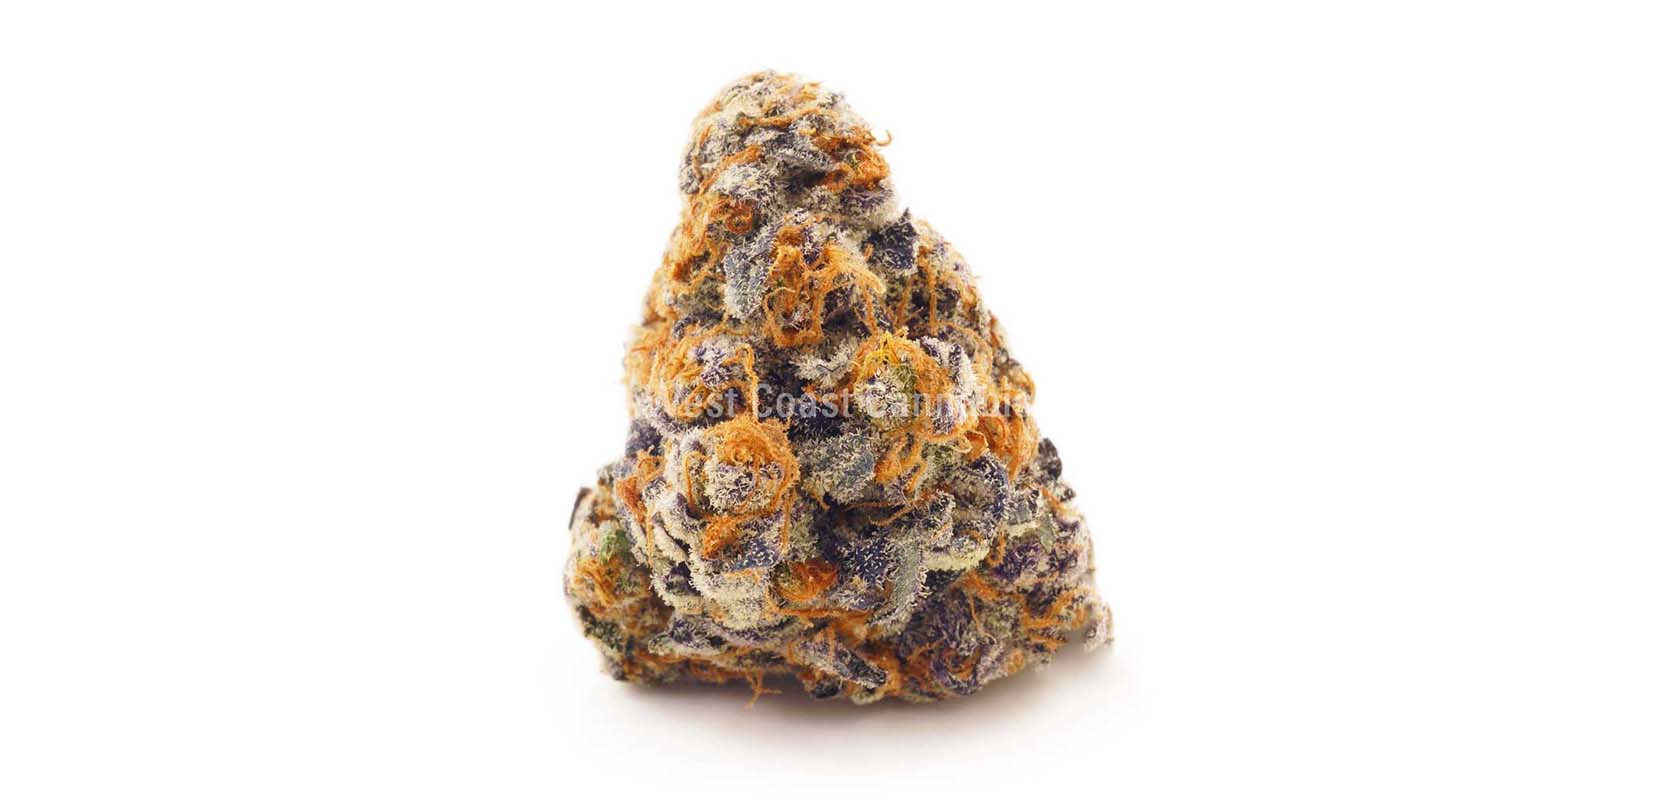 Laughing Buddha value buds and cheapweed from West Coast Cannabis online dispensary Canada.